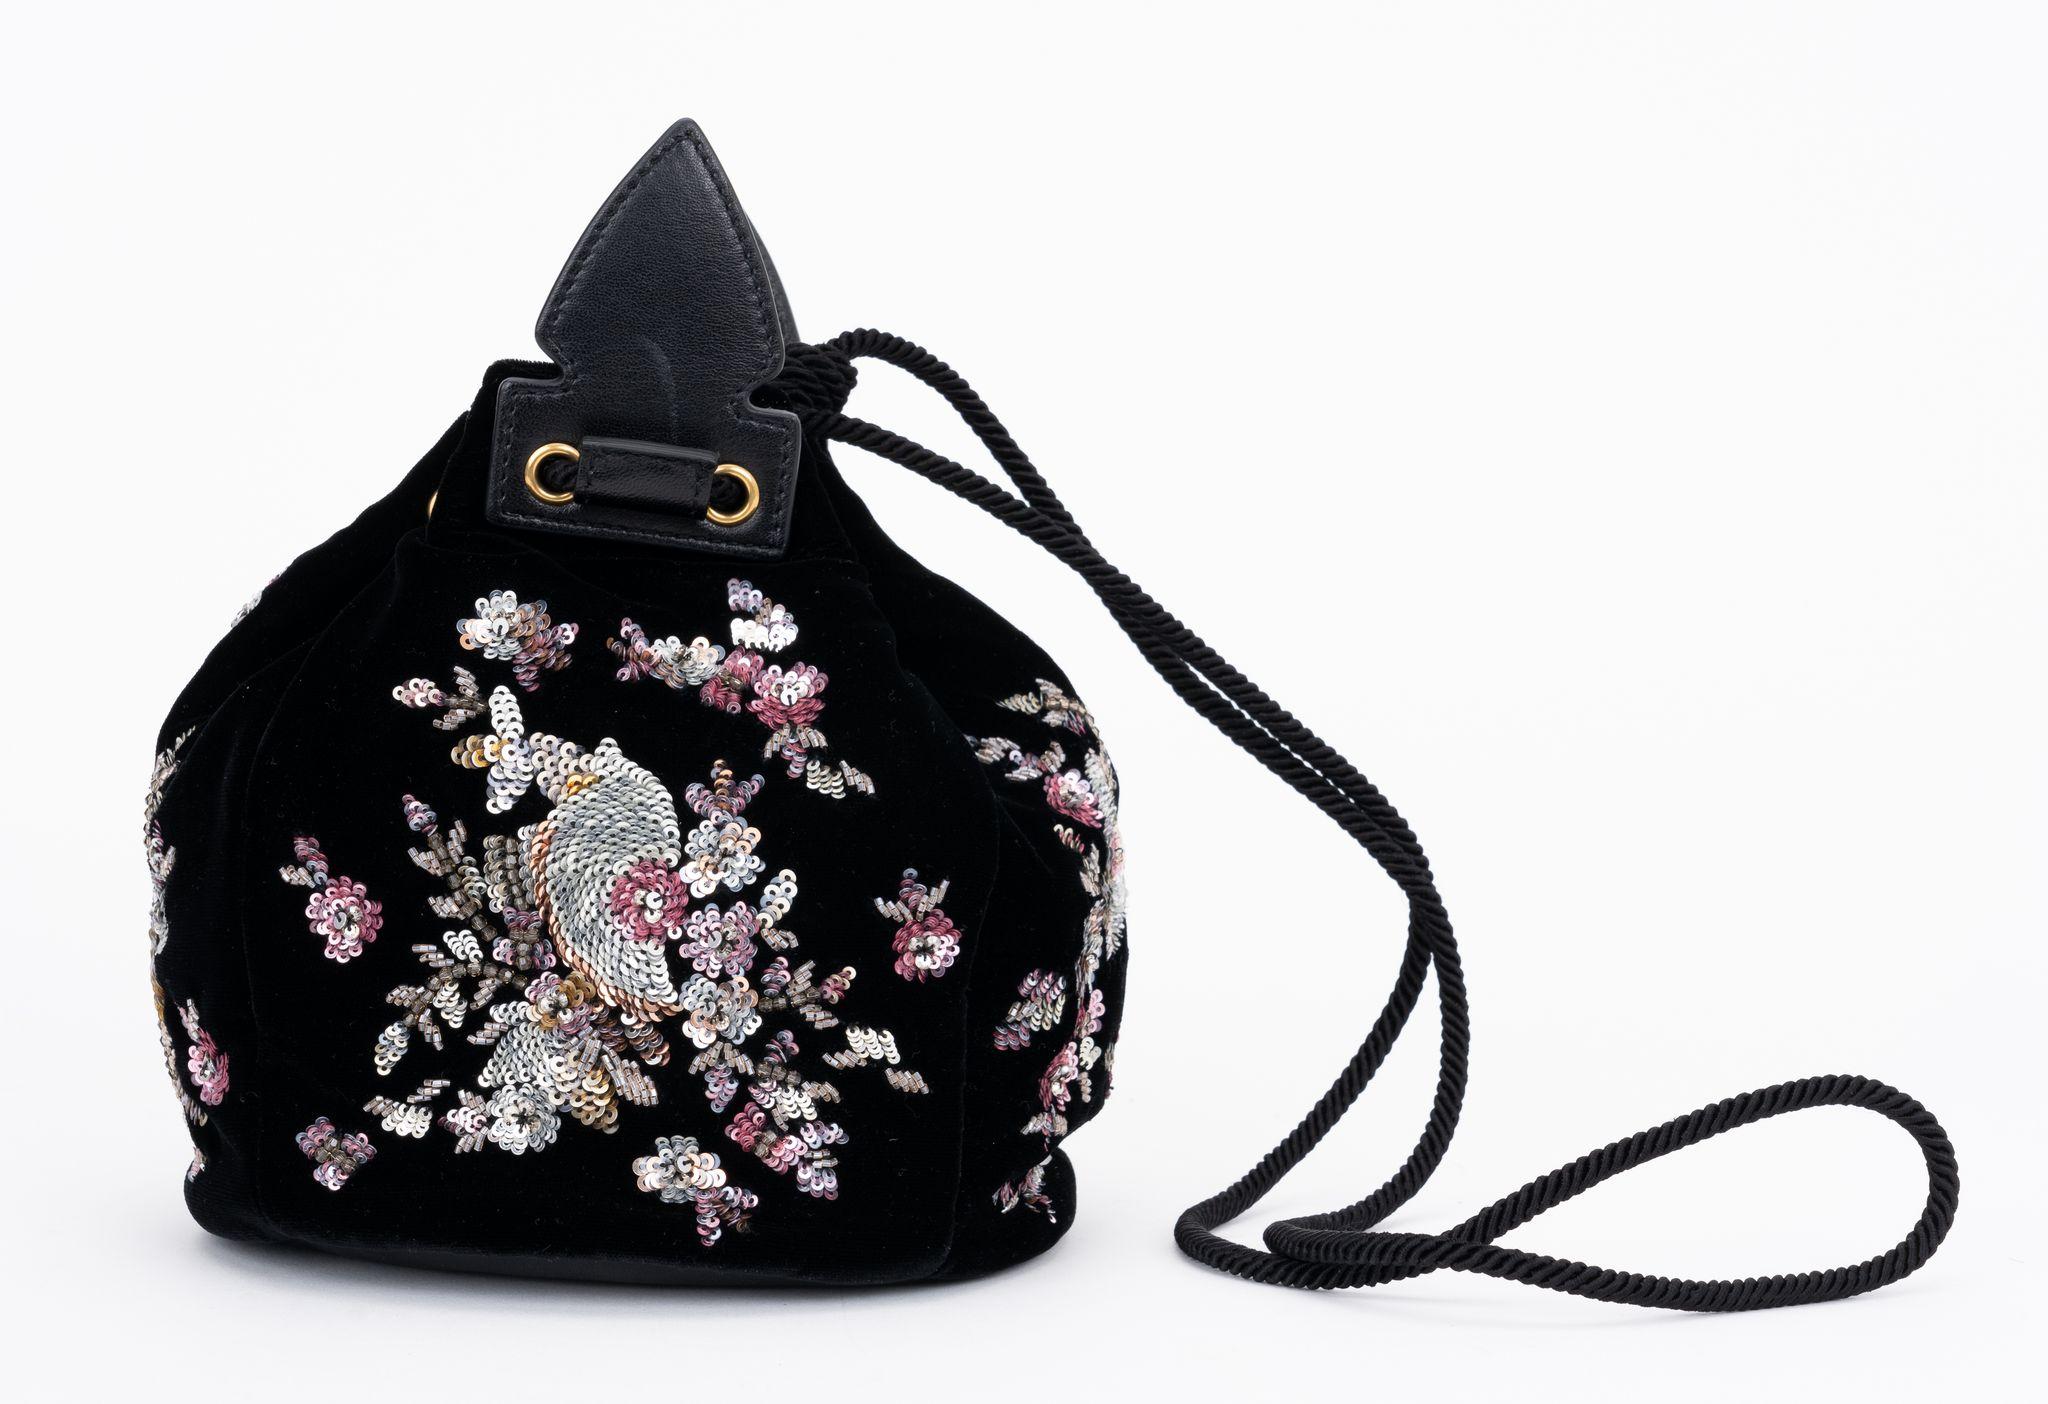 Women's New Ysl Black Embroidered Bucket Bag For Sale